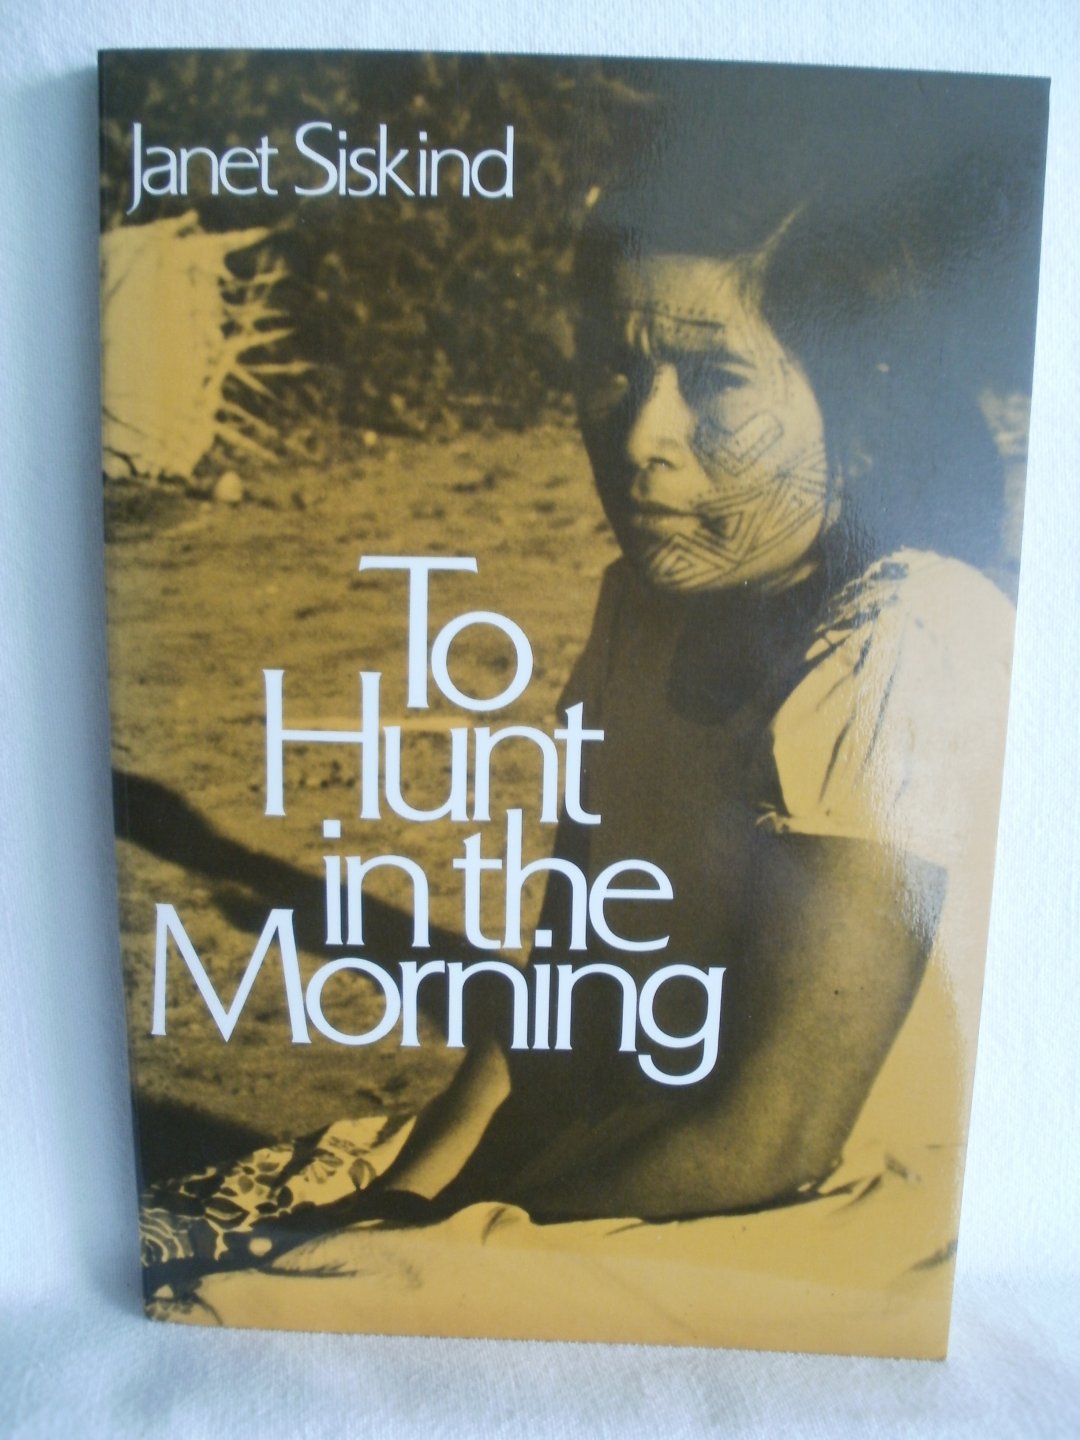 Siskind, Janet - To Hunt in the Morning.